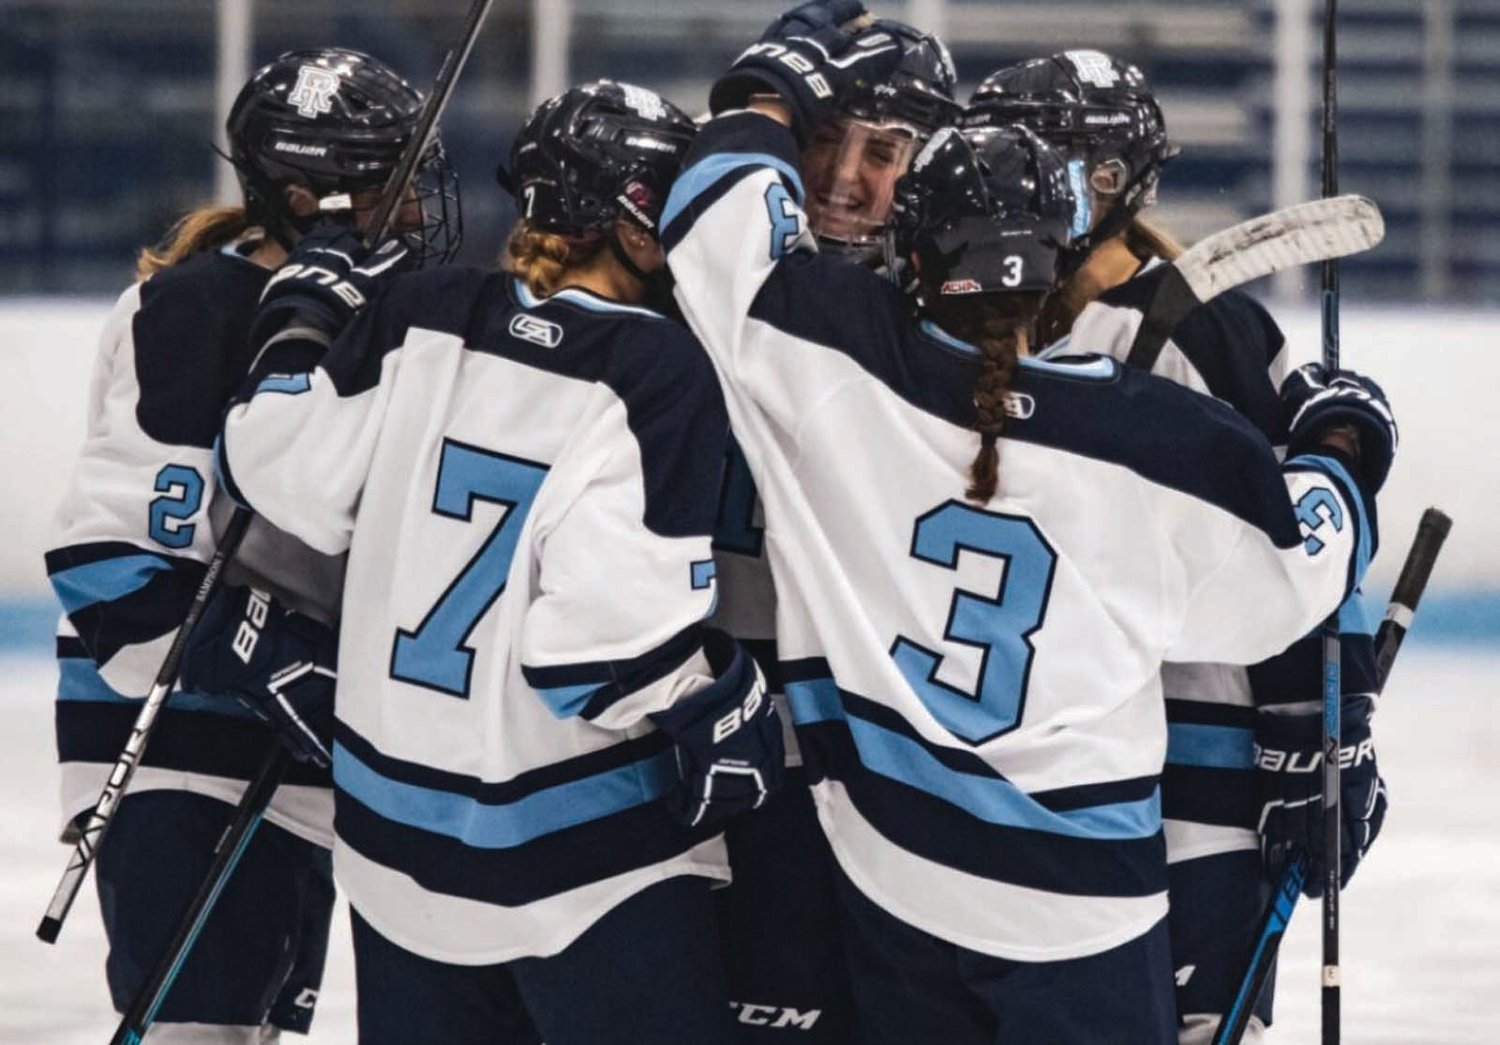 STRONG FINISH: Members of the URI women’s hockey team celebrate after scoring a goal.